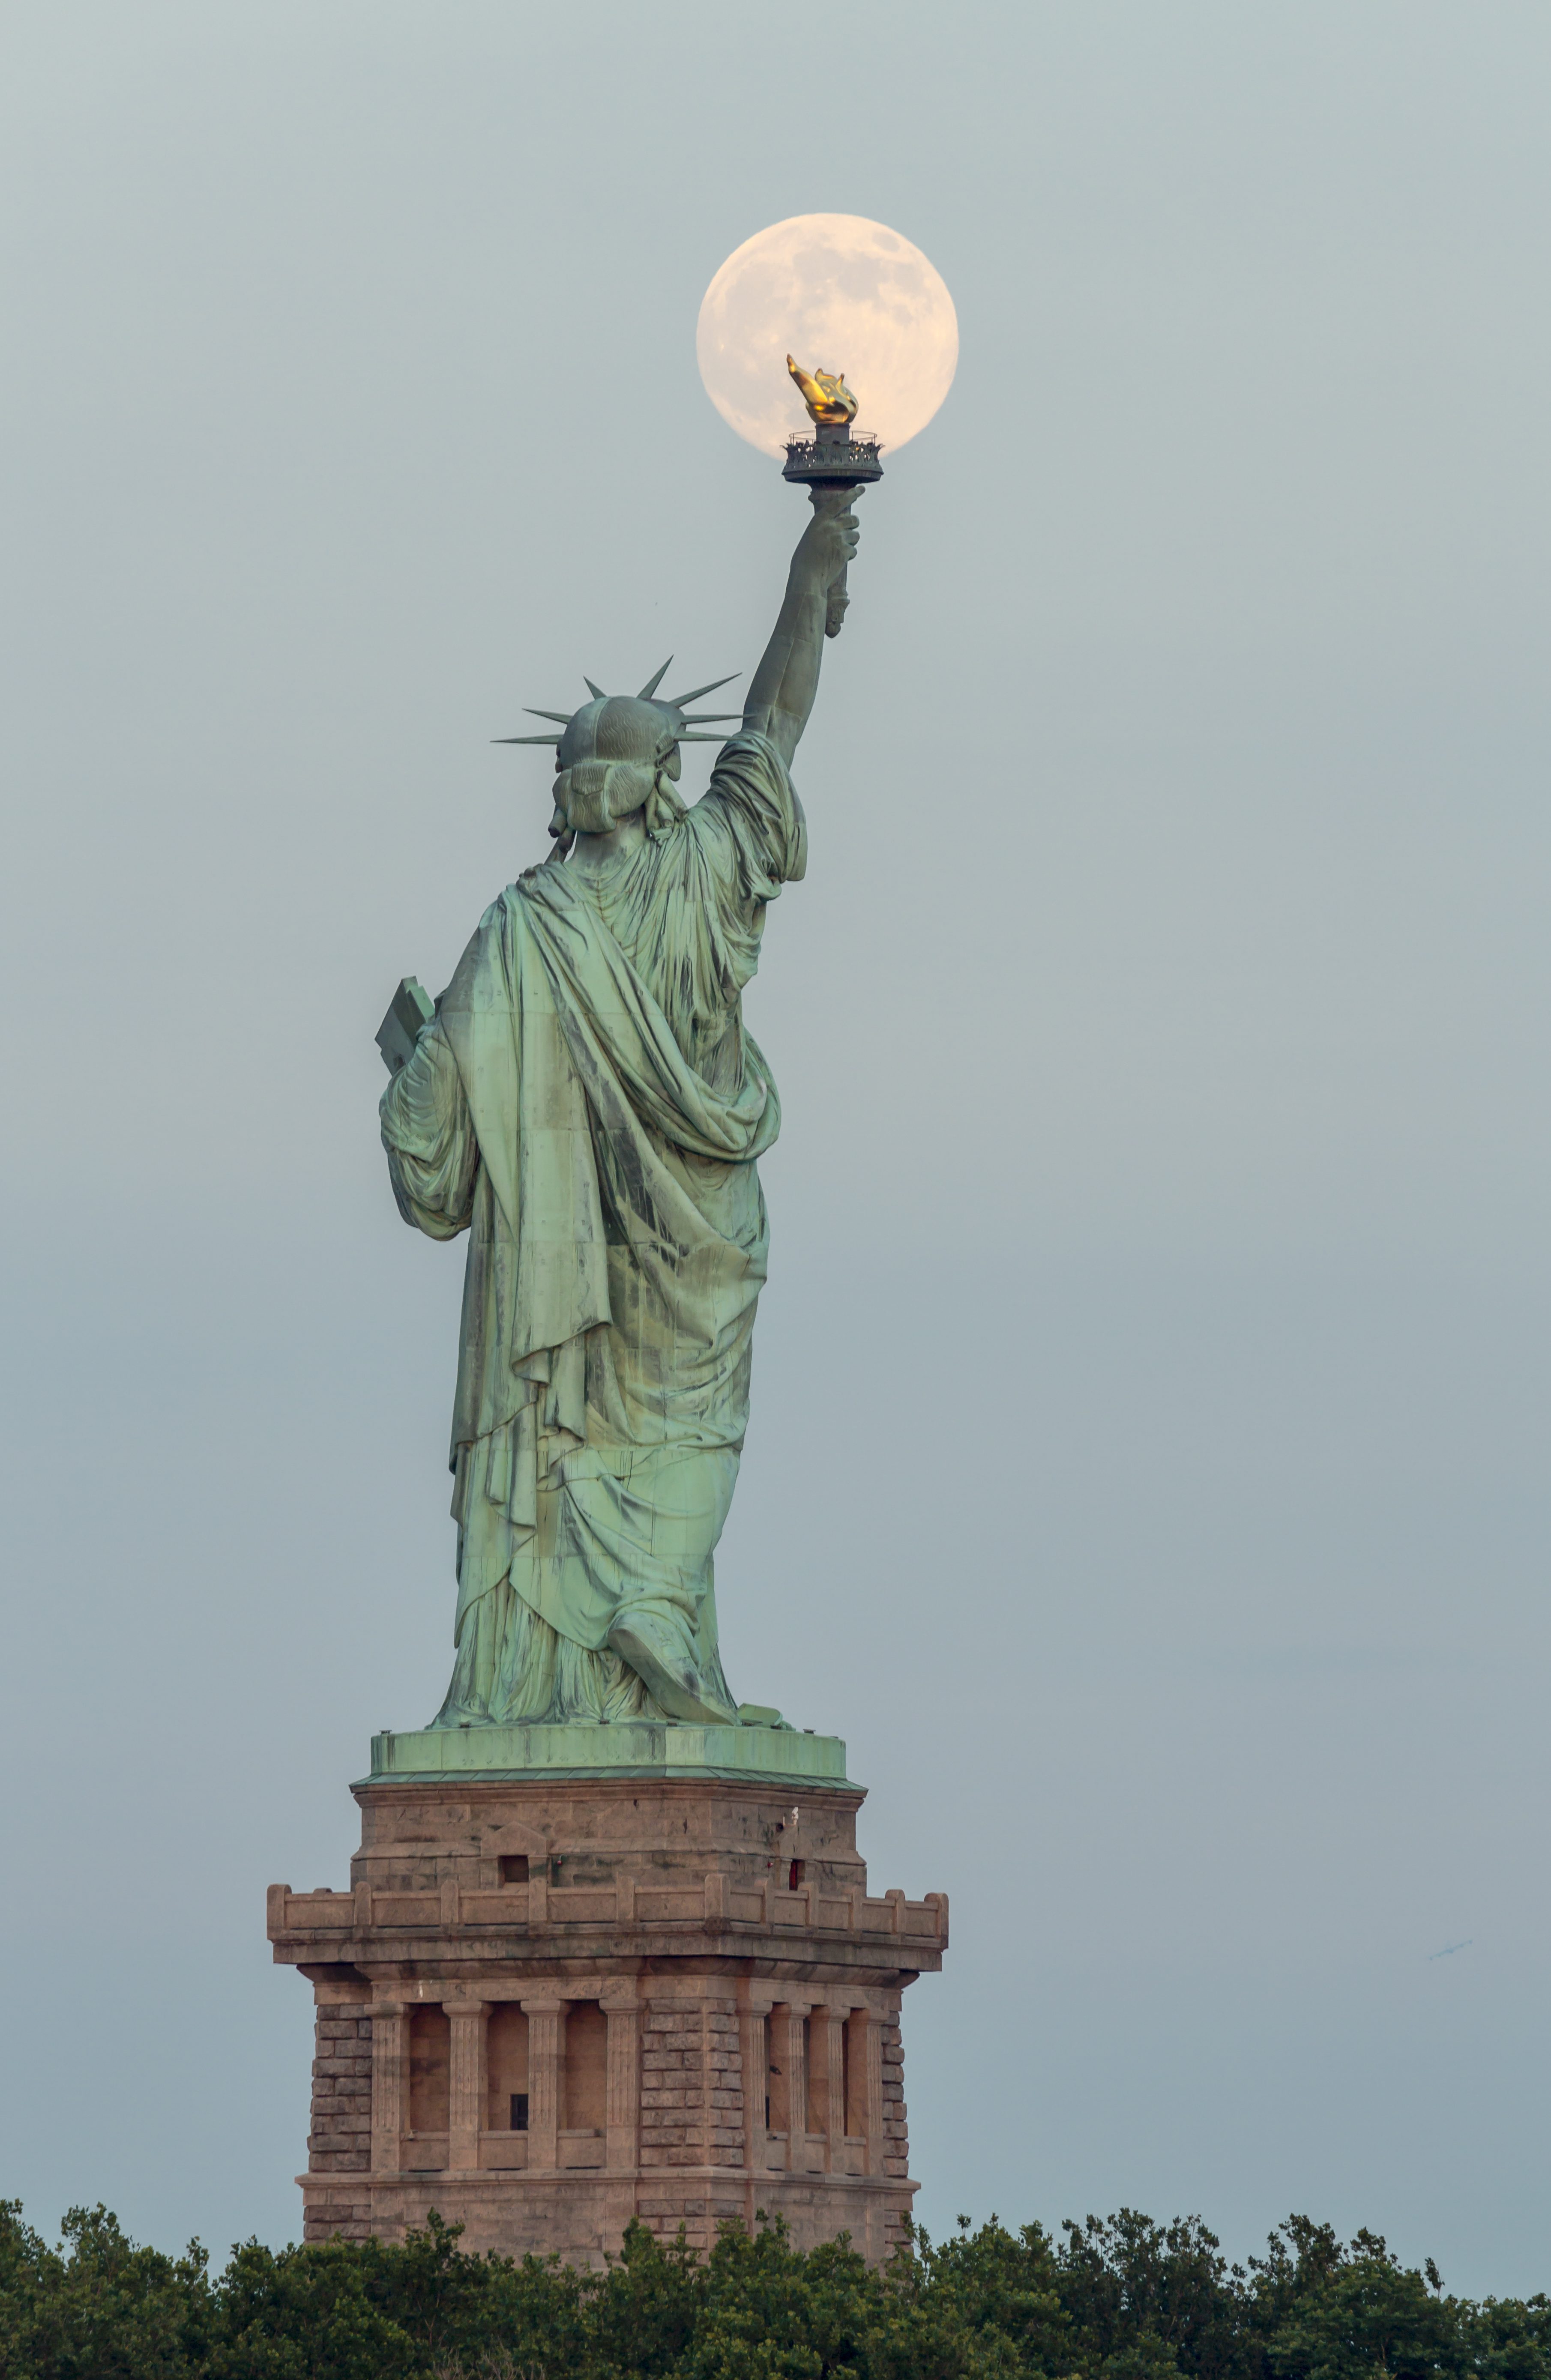 Super Moon Rises Over The Statue Of Liberty